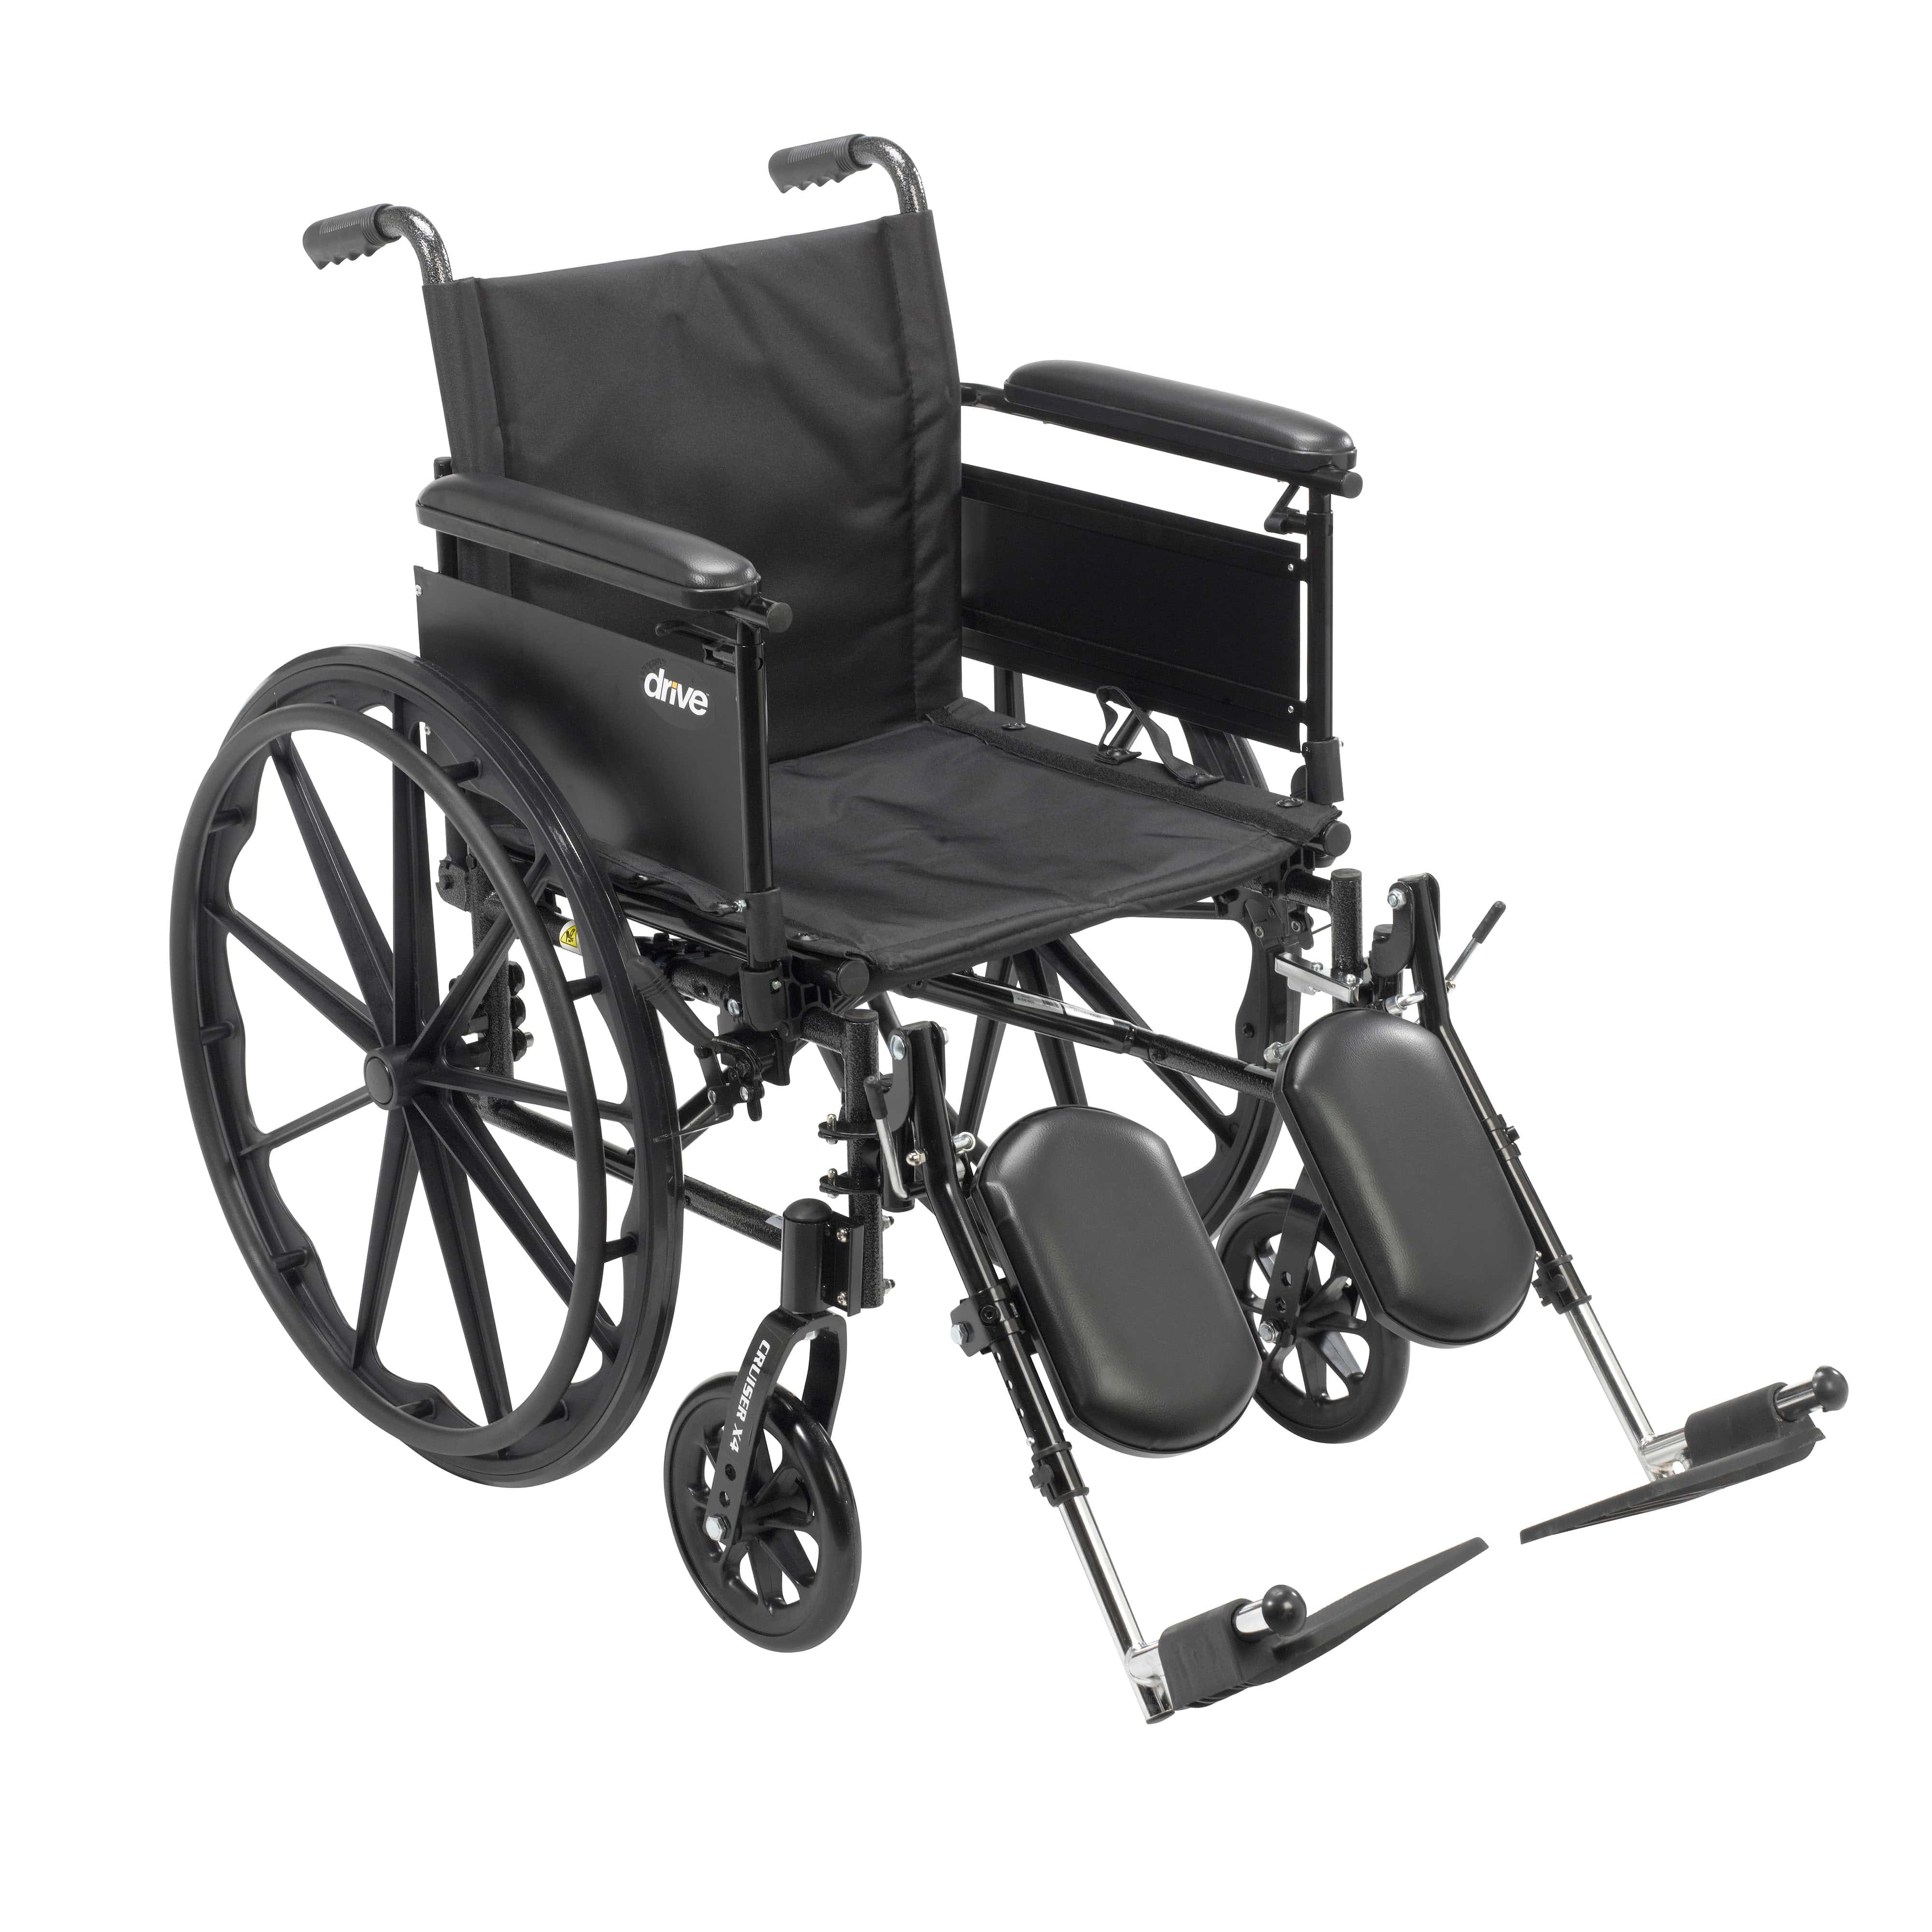 Drive Medical Wheelchairs/Lightweight Wheelchairs Full Arms / Elevating Leg Rests / 18" Seat Drive Medical Cruiser X4 Lightweight Dual Axle Wheelchair with Adjustable Detatchable Arms